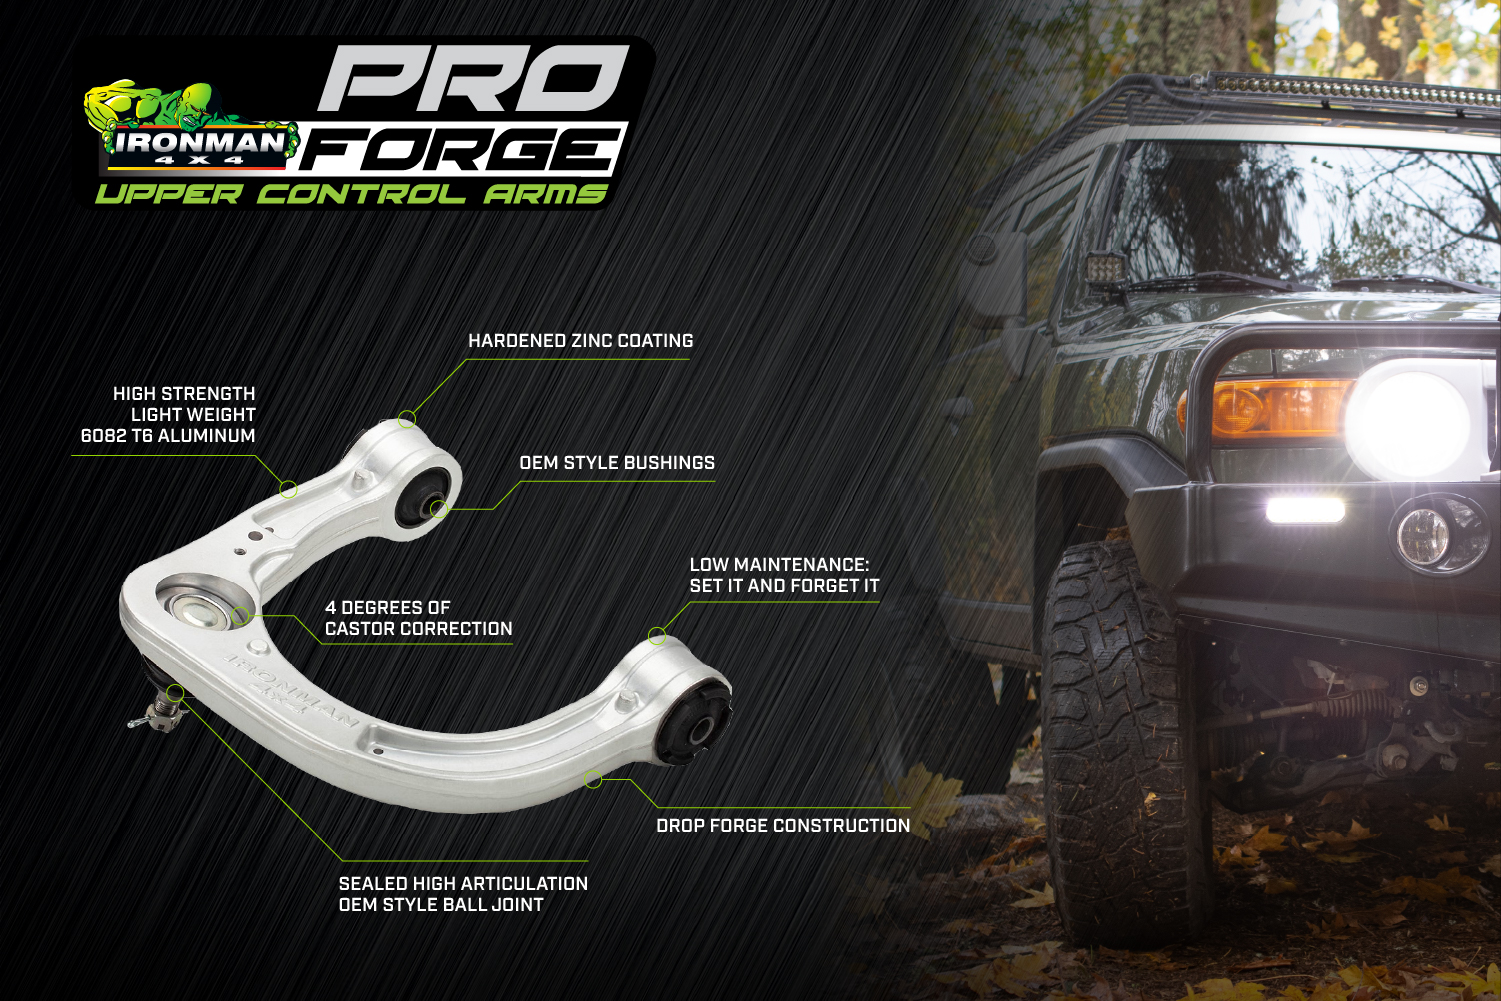 Pro Forge Upper Control Arms Suited For Toyota FJ Cruiser Questions & Answers